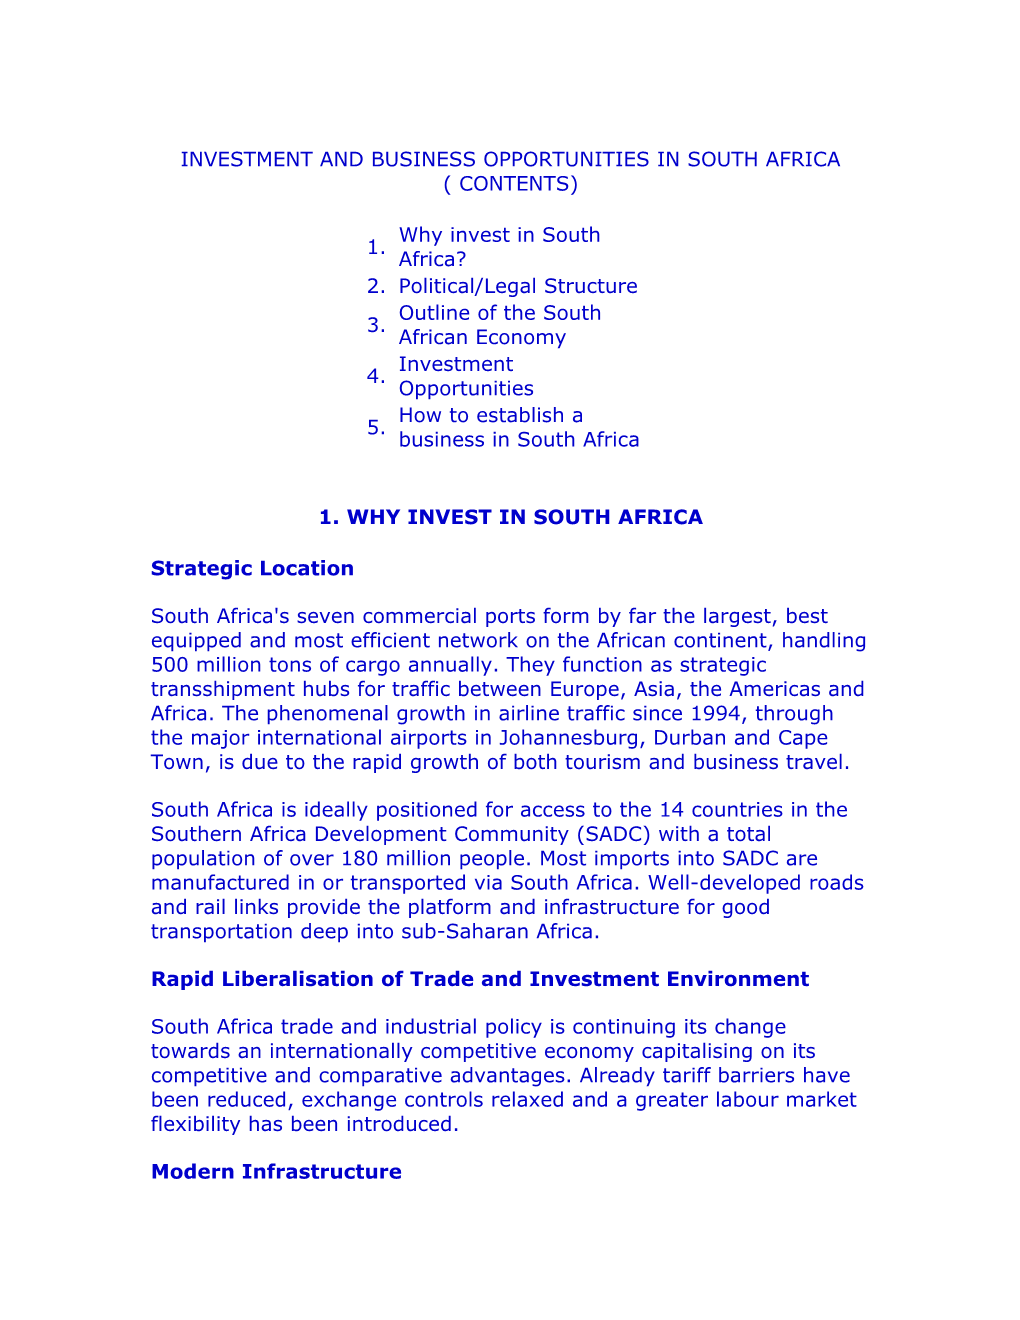 Investment and Business Opportunities in South Africa